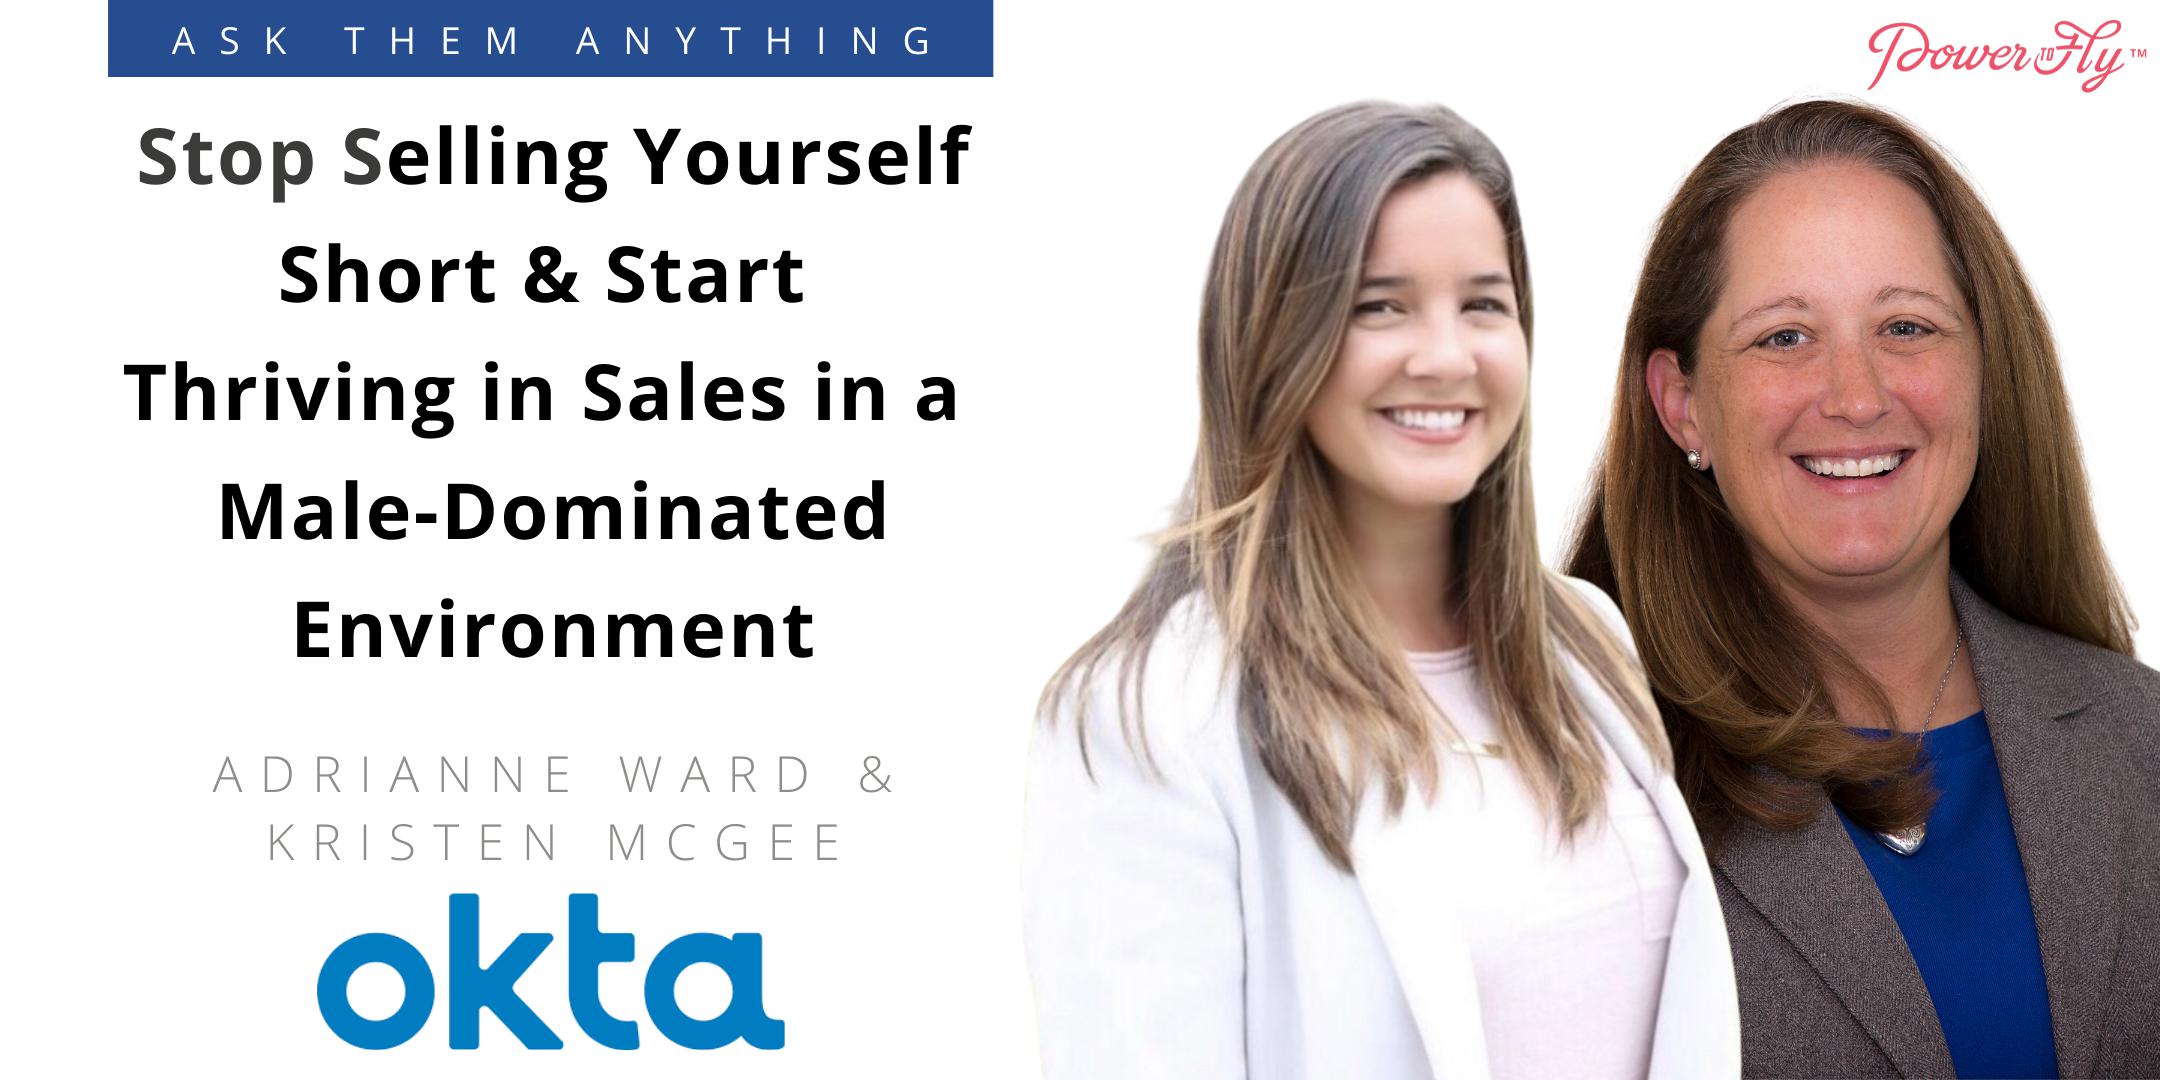 Stop Selling Yourself Short & Start Thriving in Sales in a Male-Dominated Environment